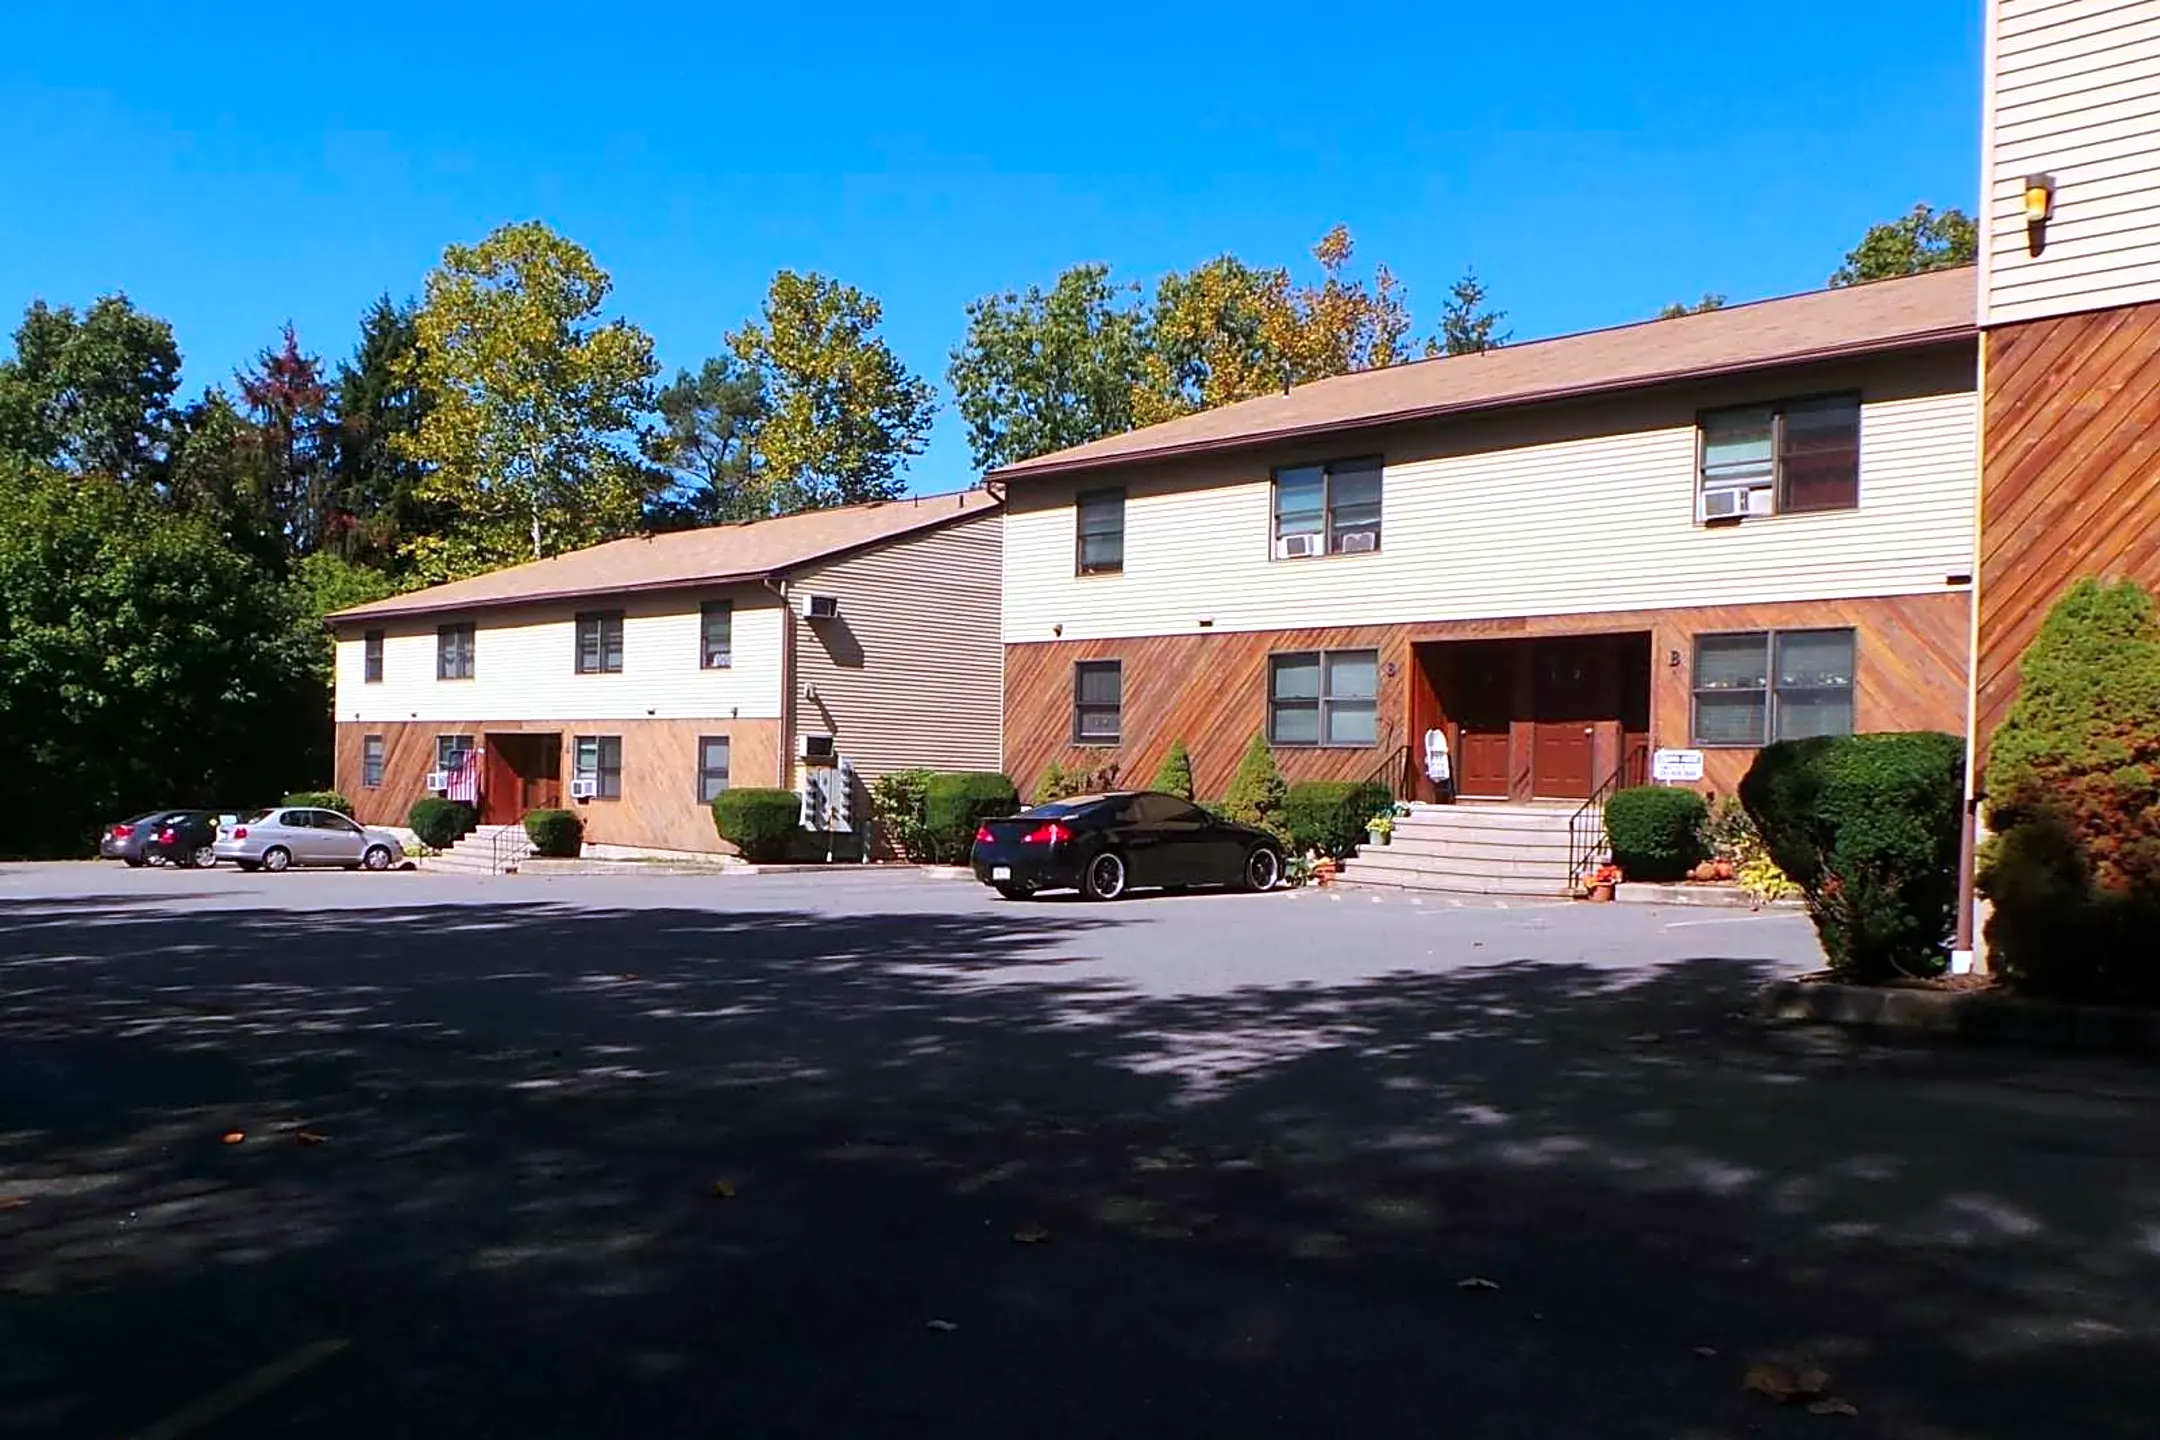 Building - Lakeside Manor Apartments - East Stroudsburg, PA